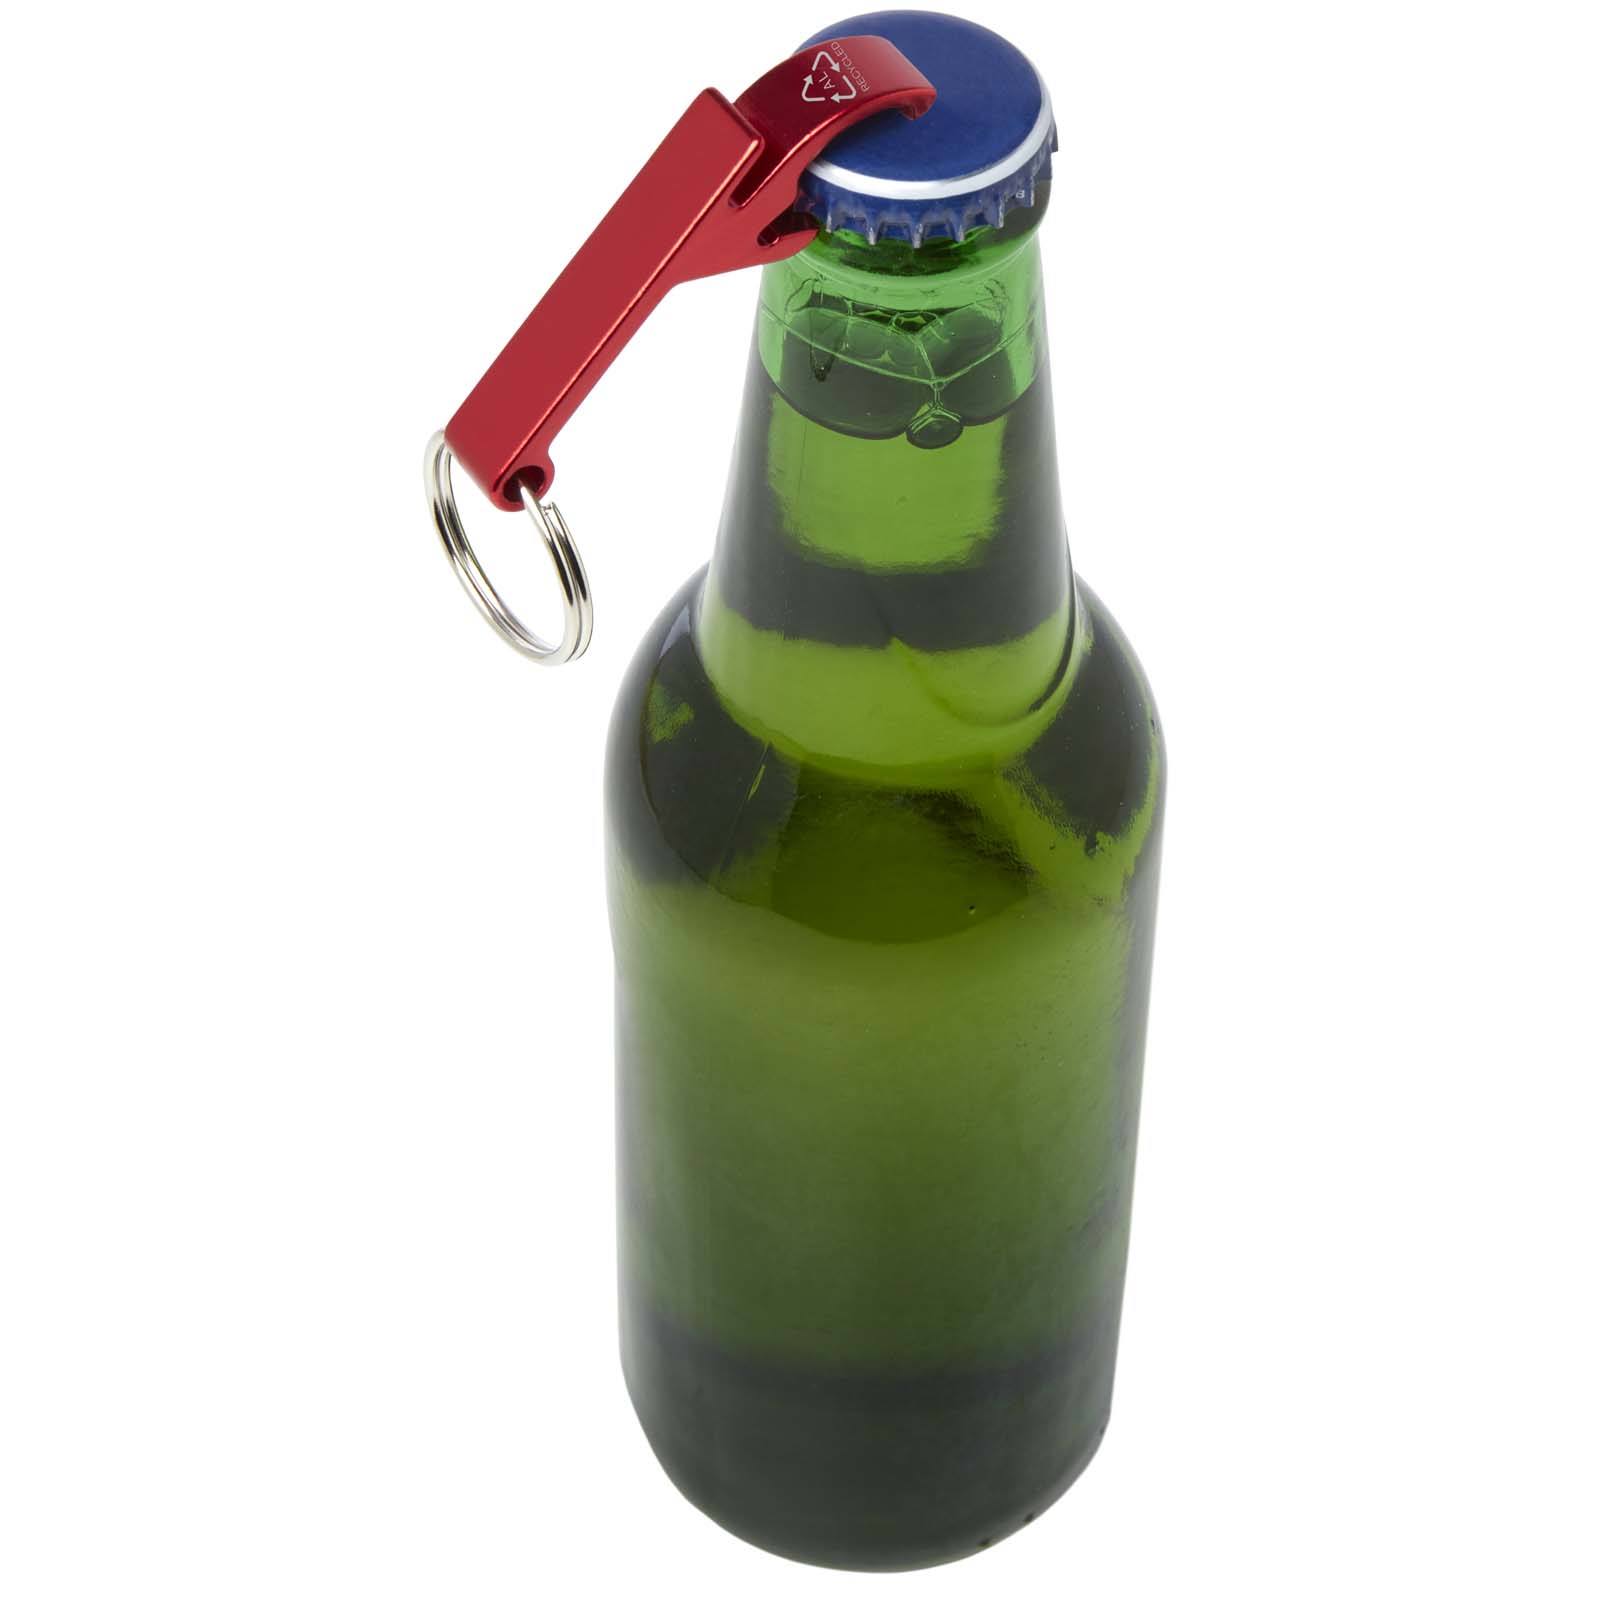 Advertising Keychains & Keyrings - Tao RCS recycled aluminium bottle and can opener with keychain  - 2